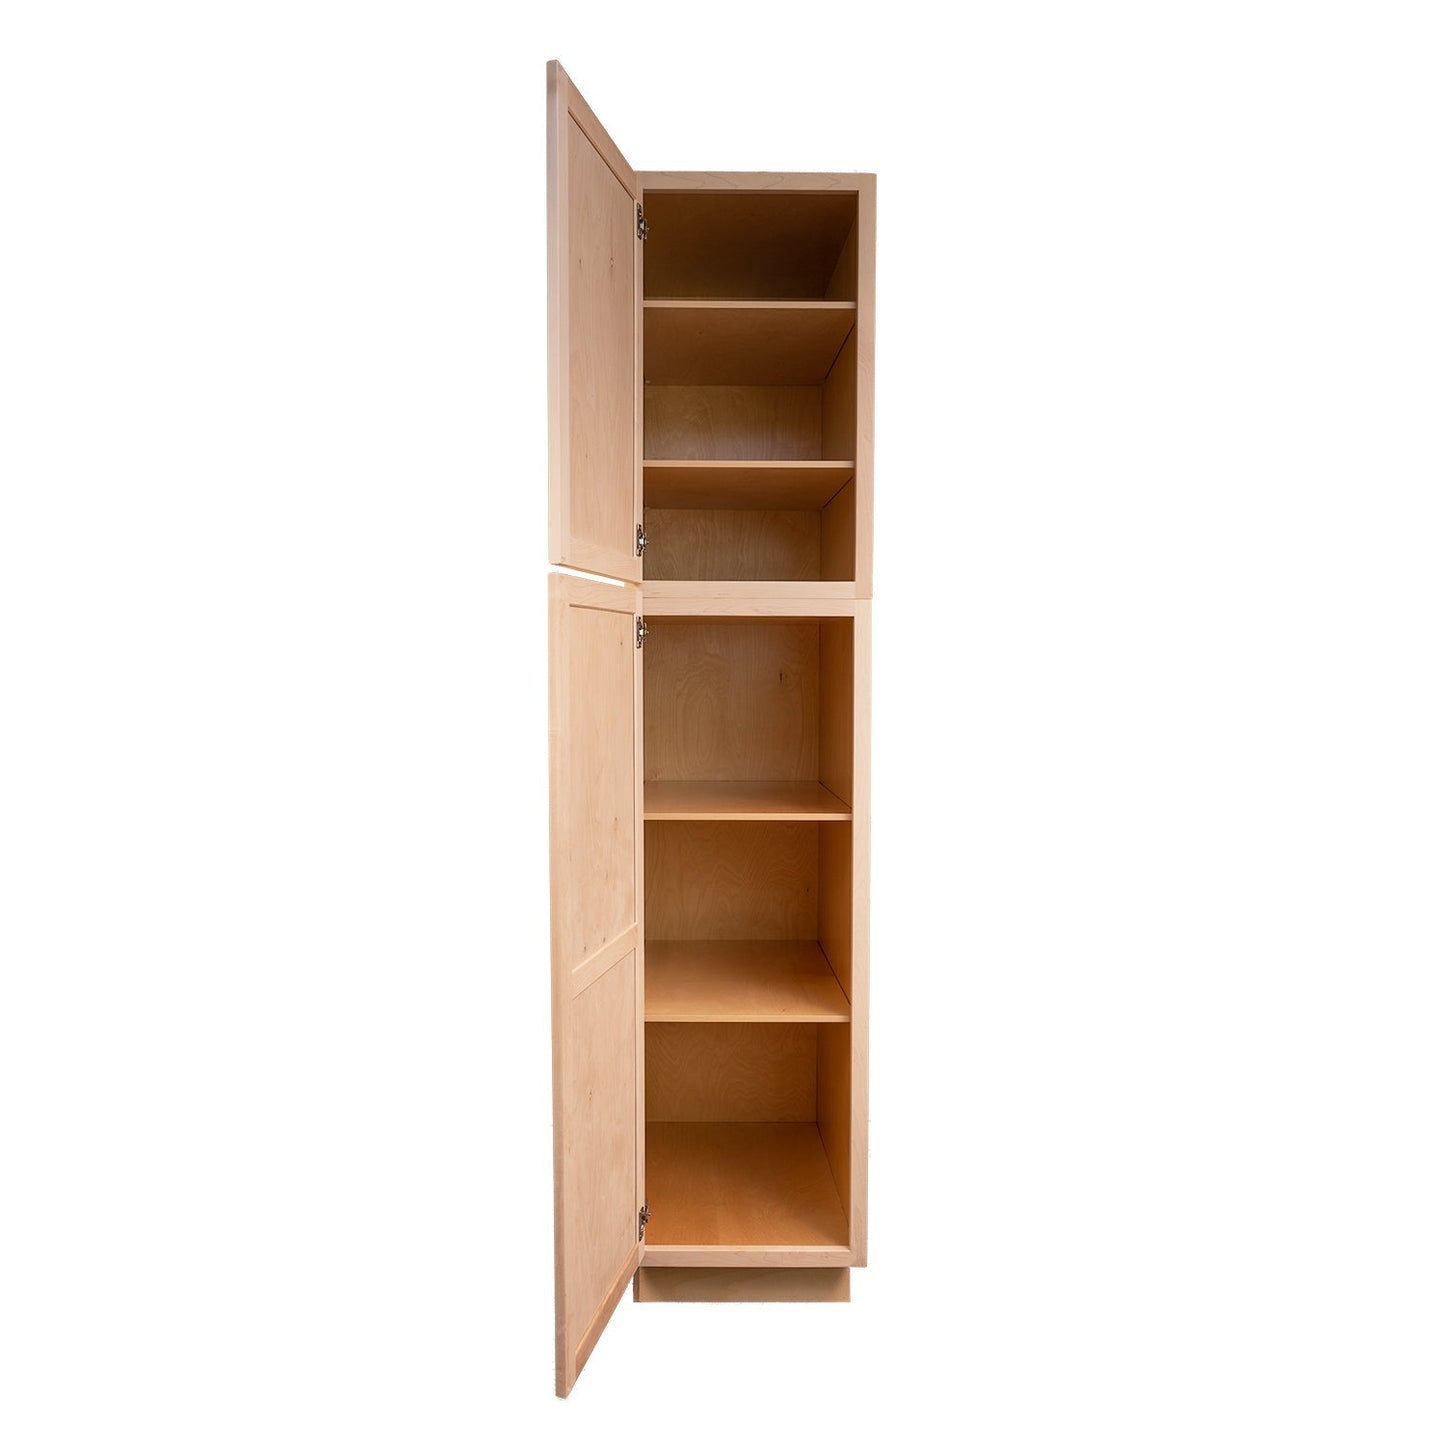 Quicklock RTA (Ready-to-Assemble) Raw Maple Pantry Cabinet 18"Wx96"Hx24"D